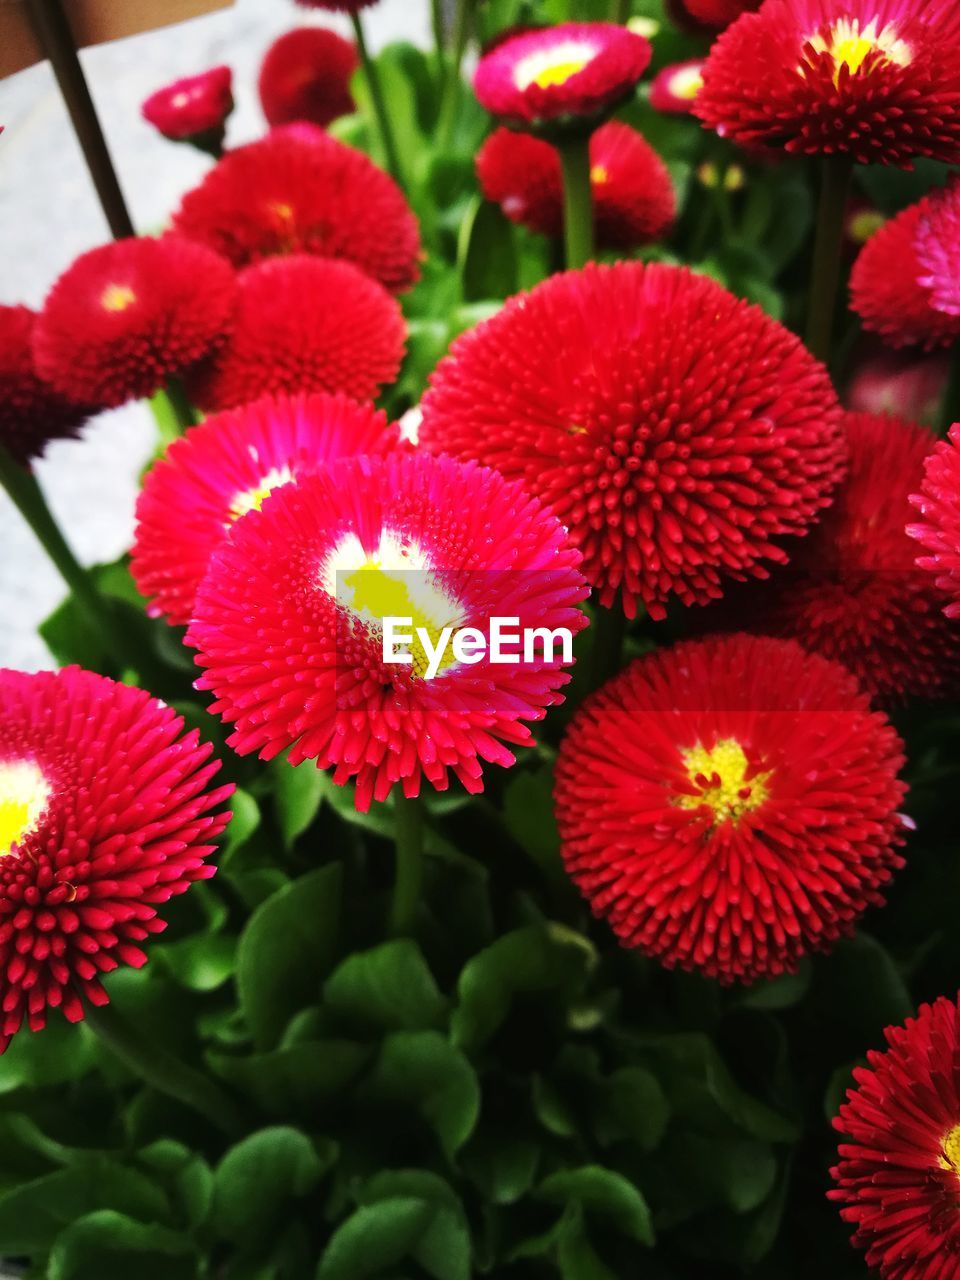 CLOSE-UP OF RED FLOWERS BLOOMING IN PLANT